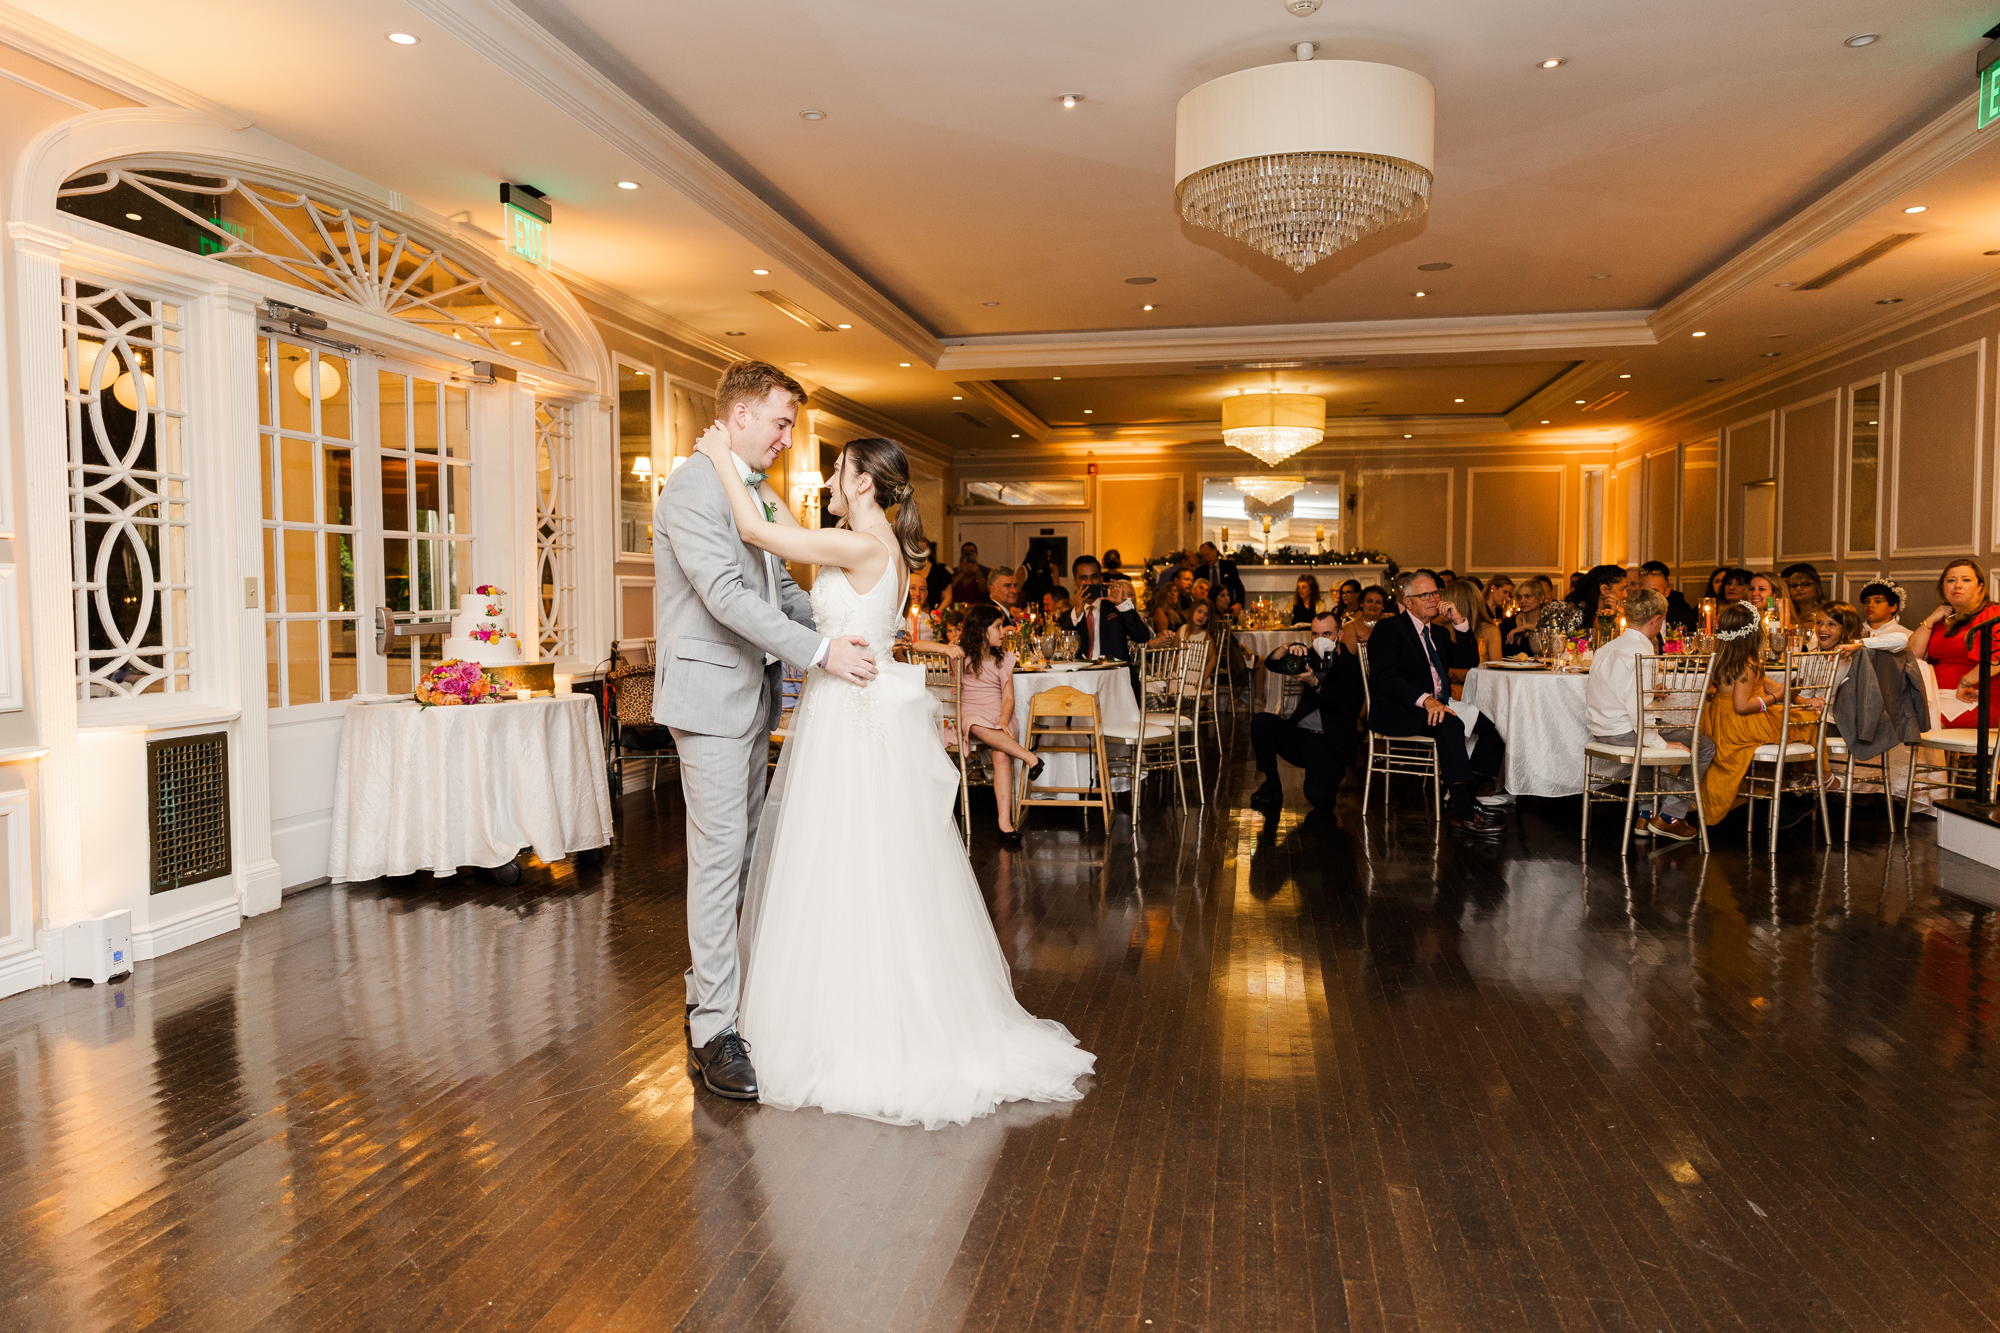 Timeless Wedding at Briarcliff Manor in Summertime